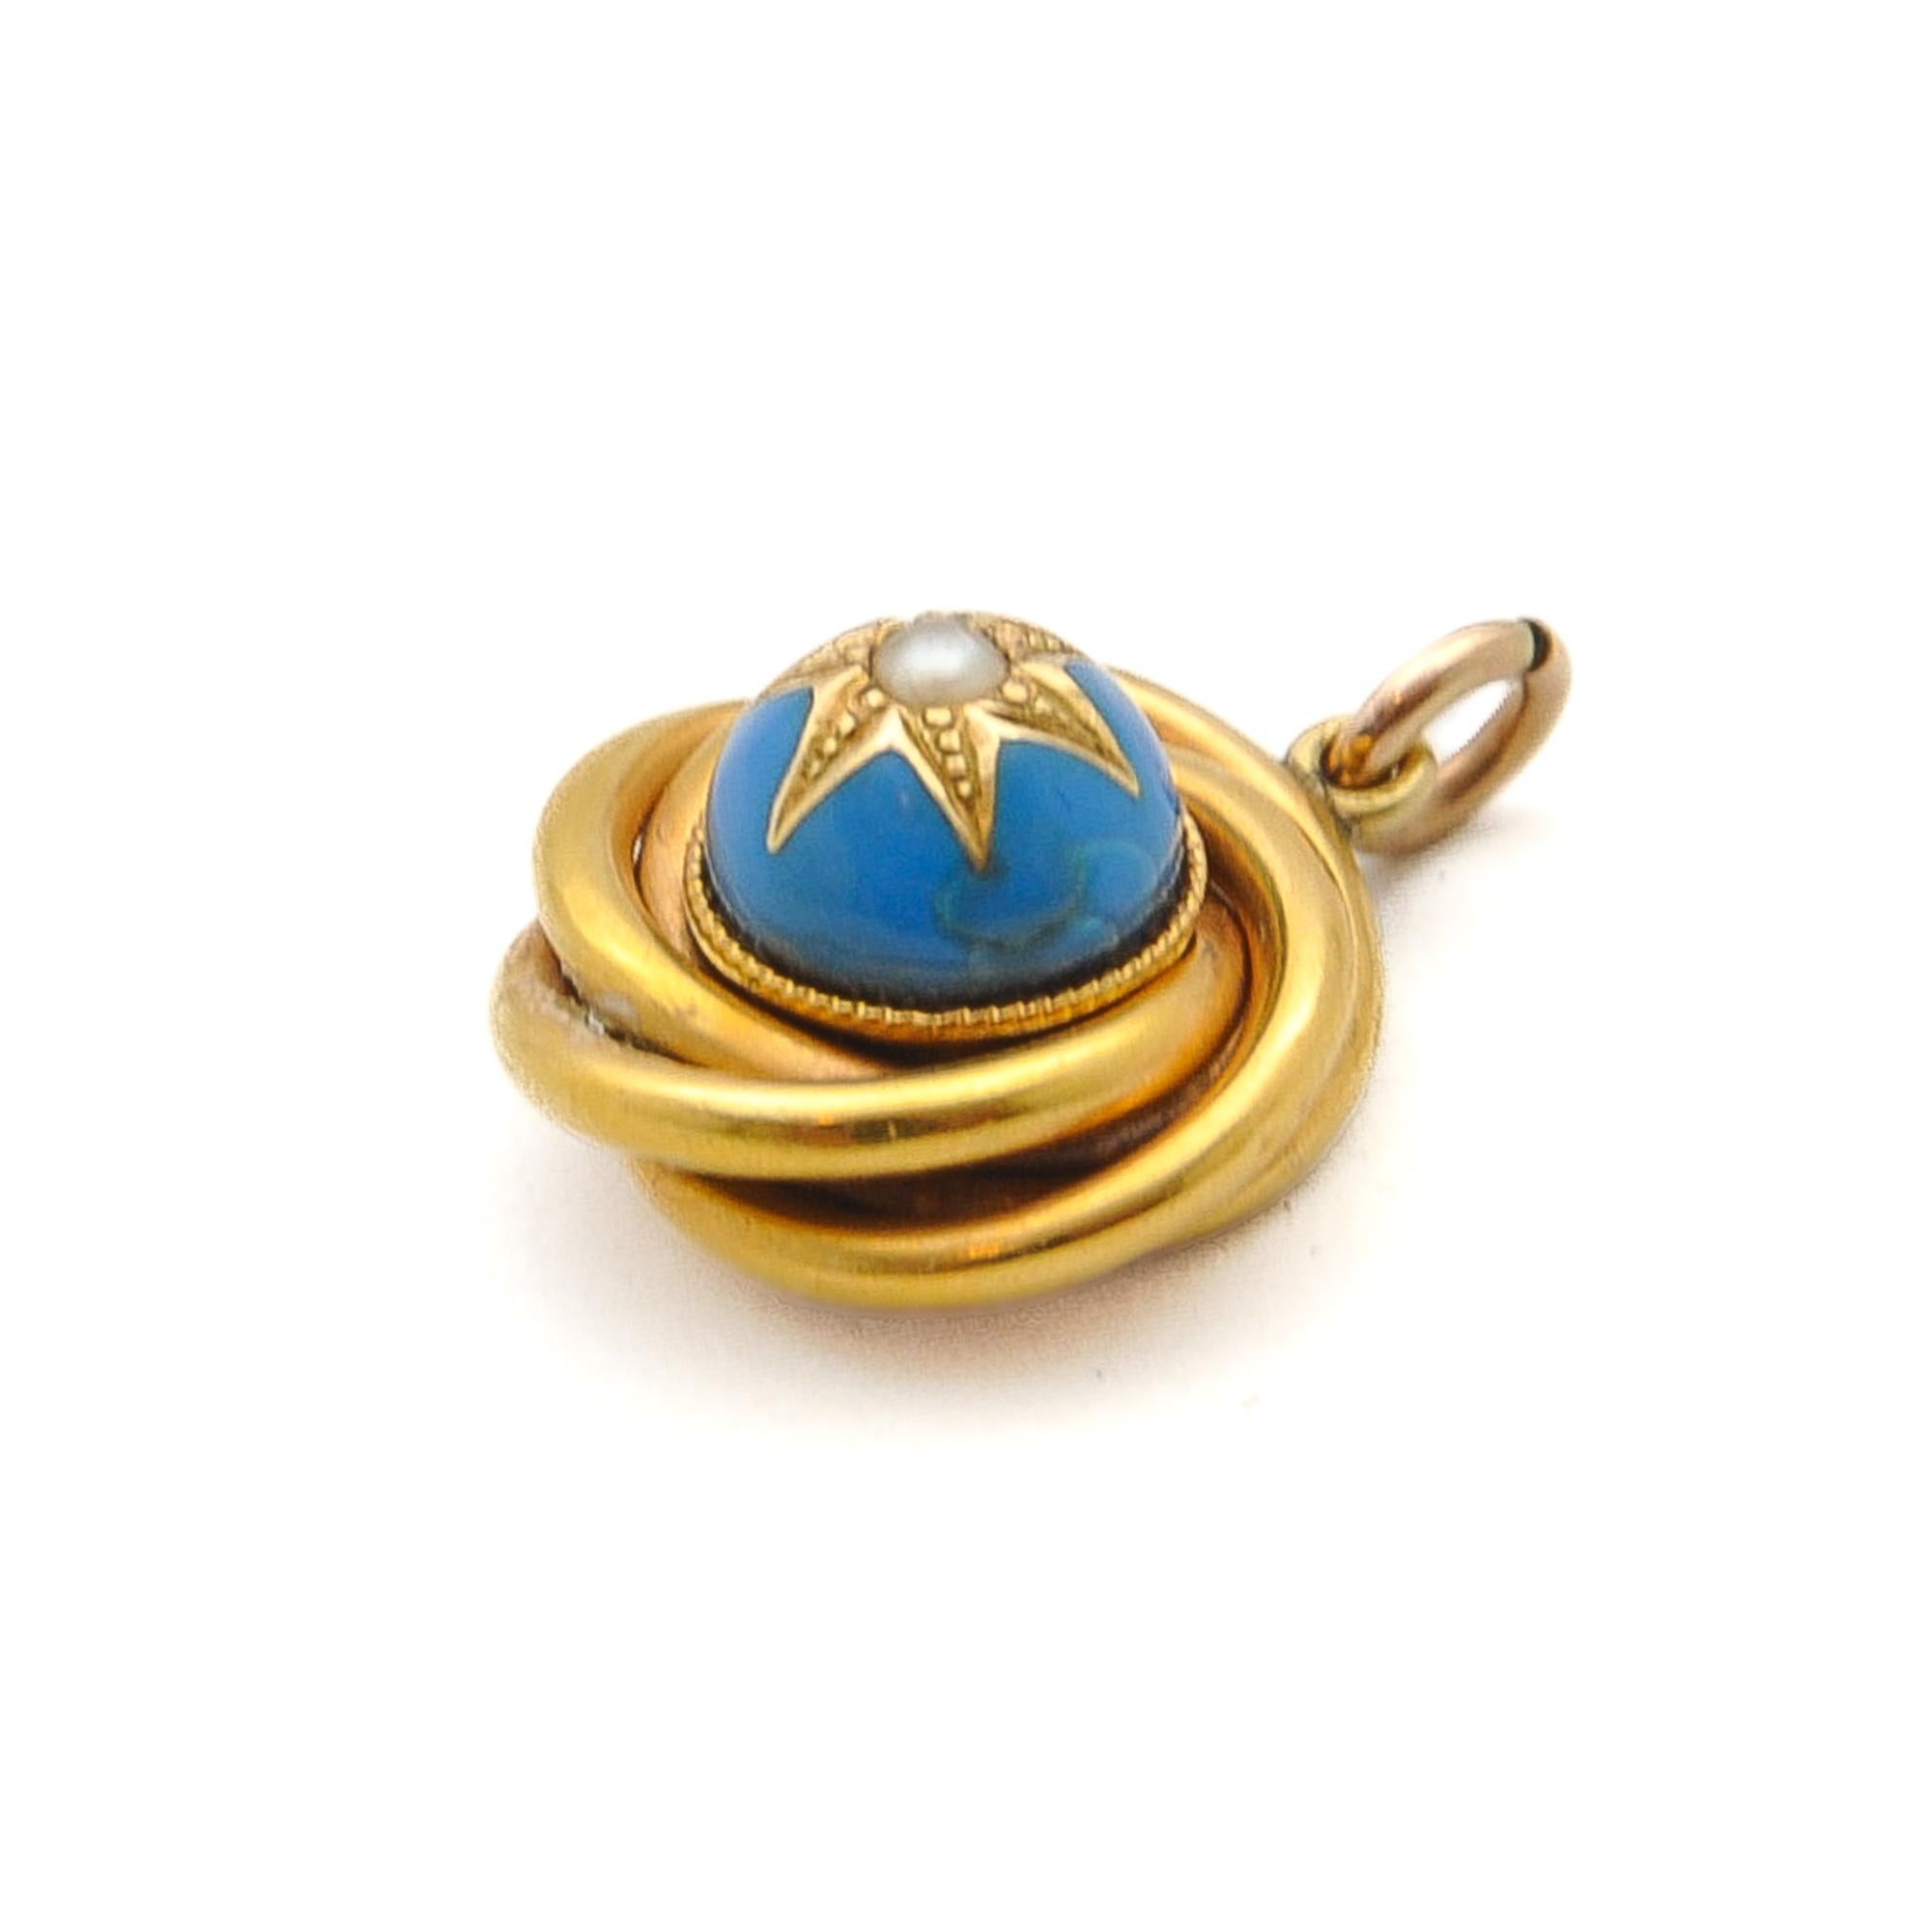 Antique Victorian 15K Gold Blue Enamel Love Knot Pendant In Good Condition For Sale In Rotterdam, NL